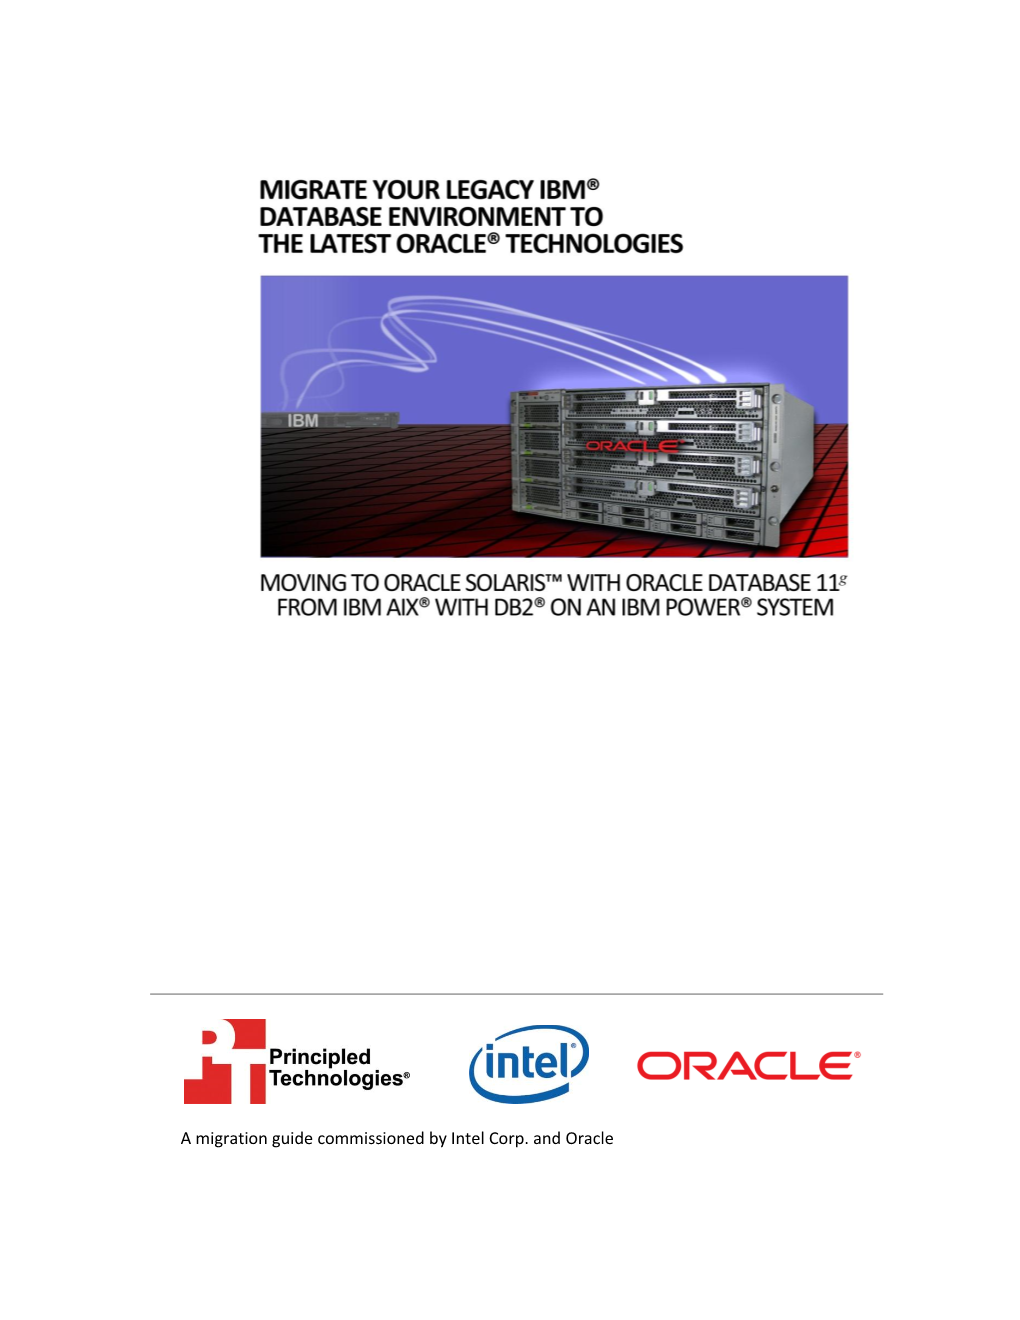 Migrating to Oracle Solaris with Oracle Database 11G on Intel Xeon